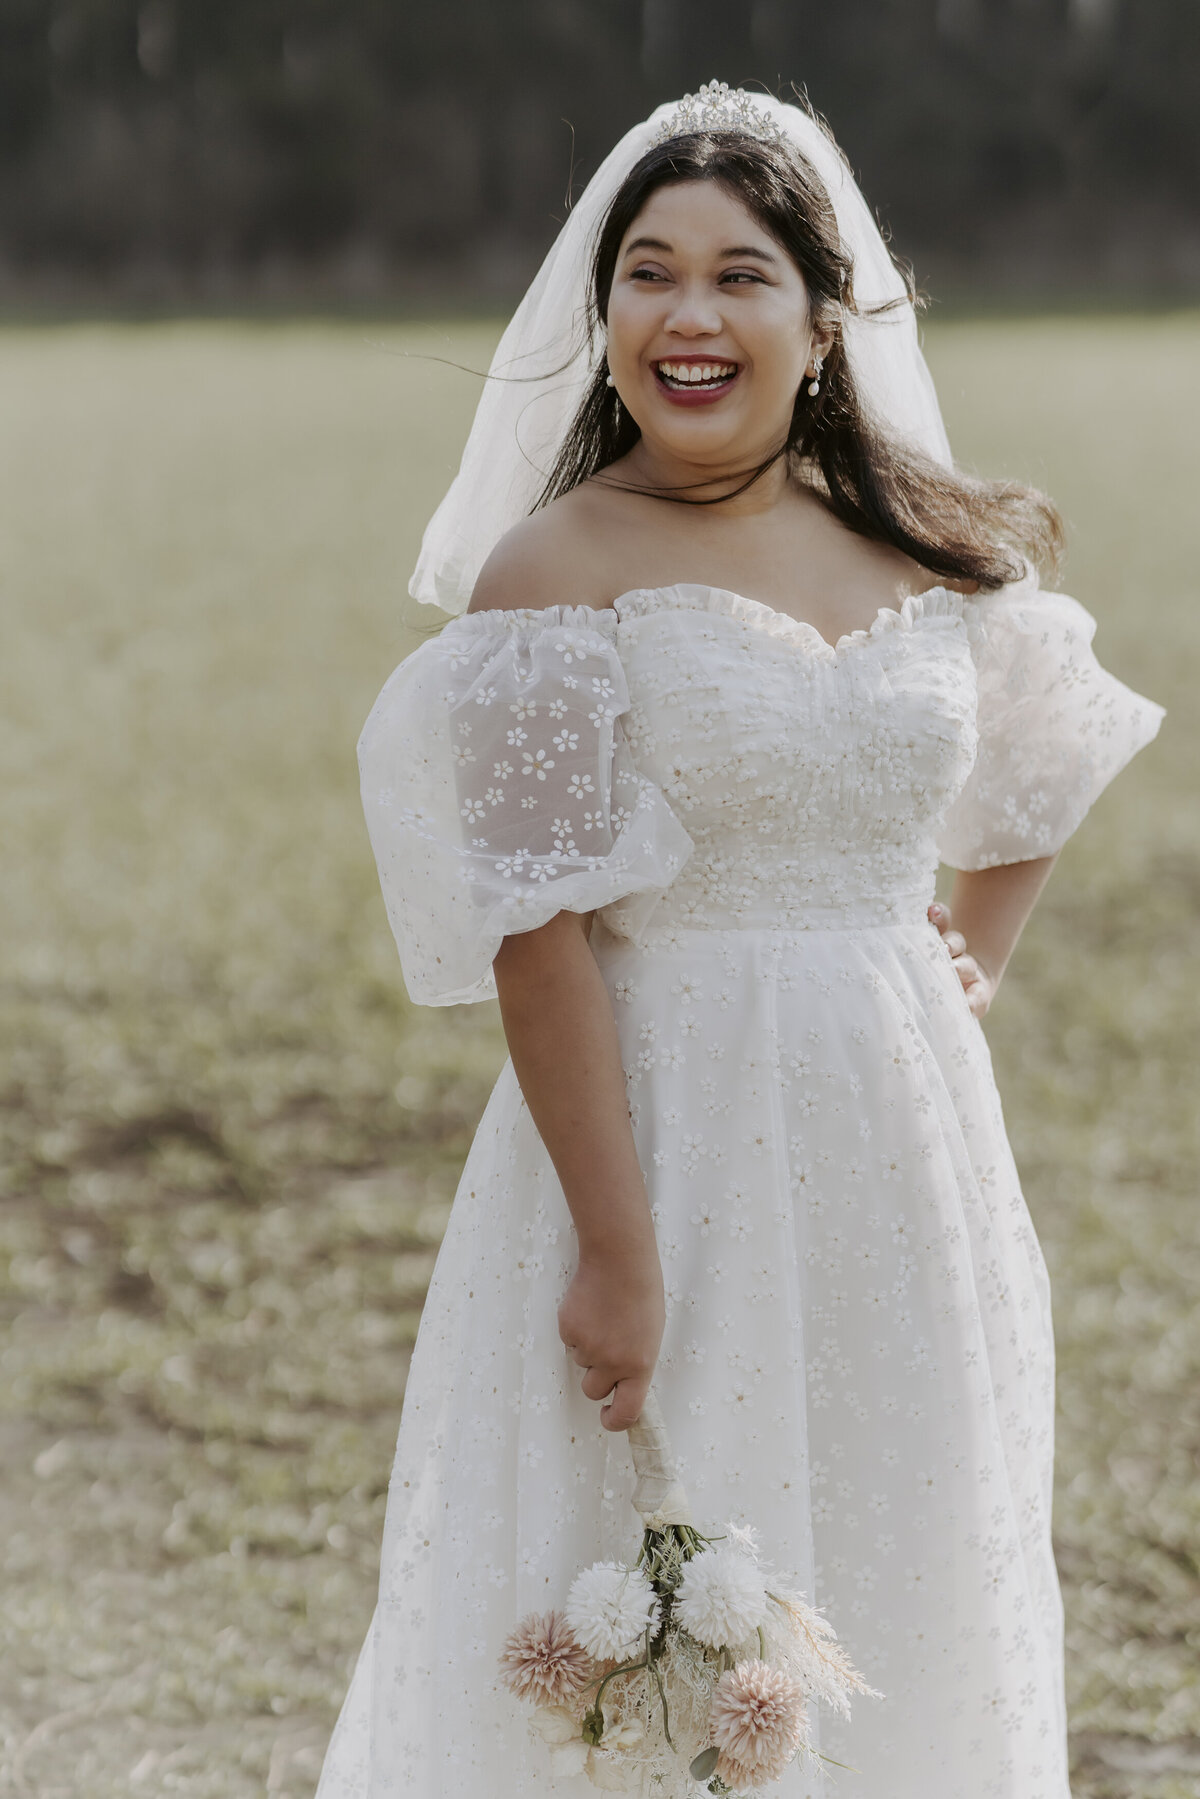 the bride is smiling and wears an off shoulder white dress and a veil while holding a bouquet